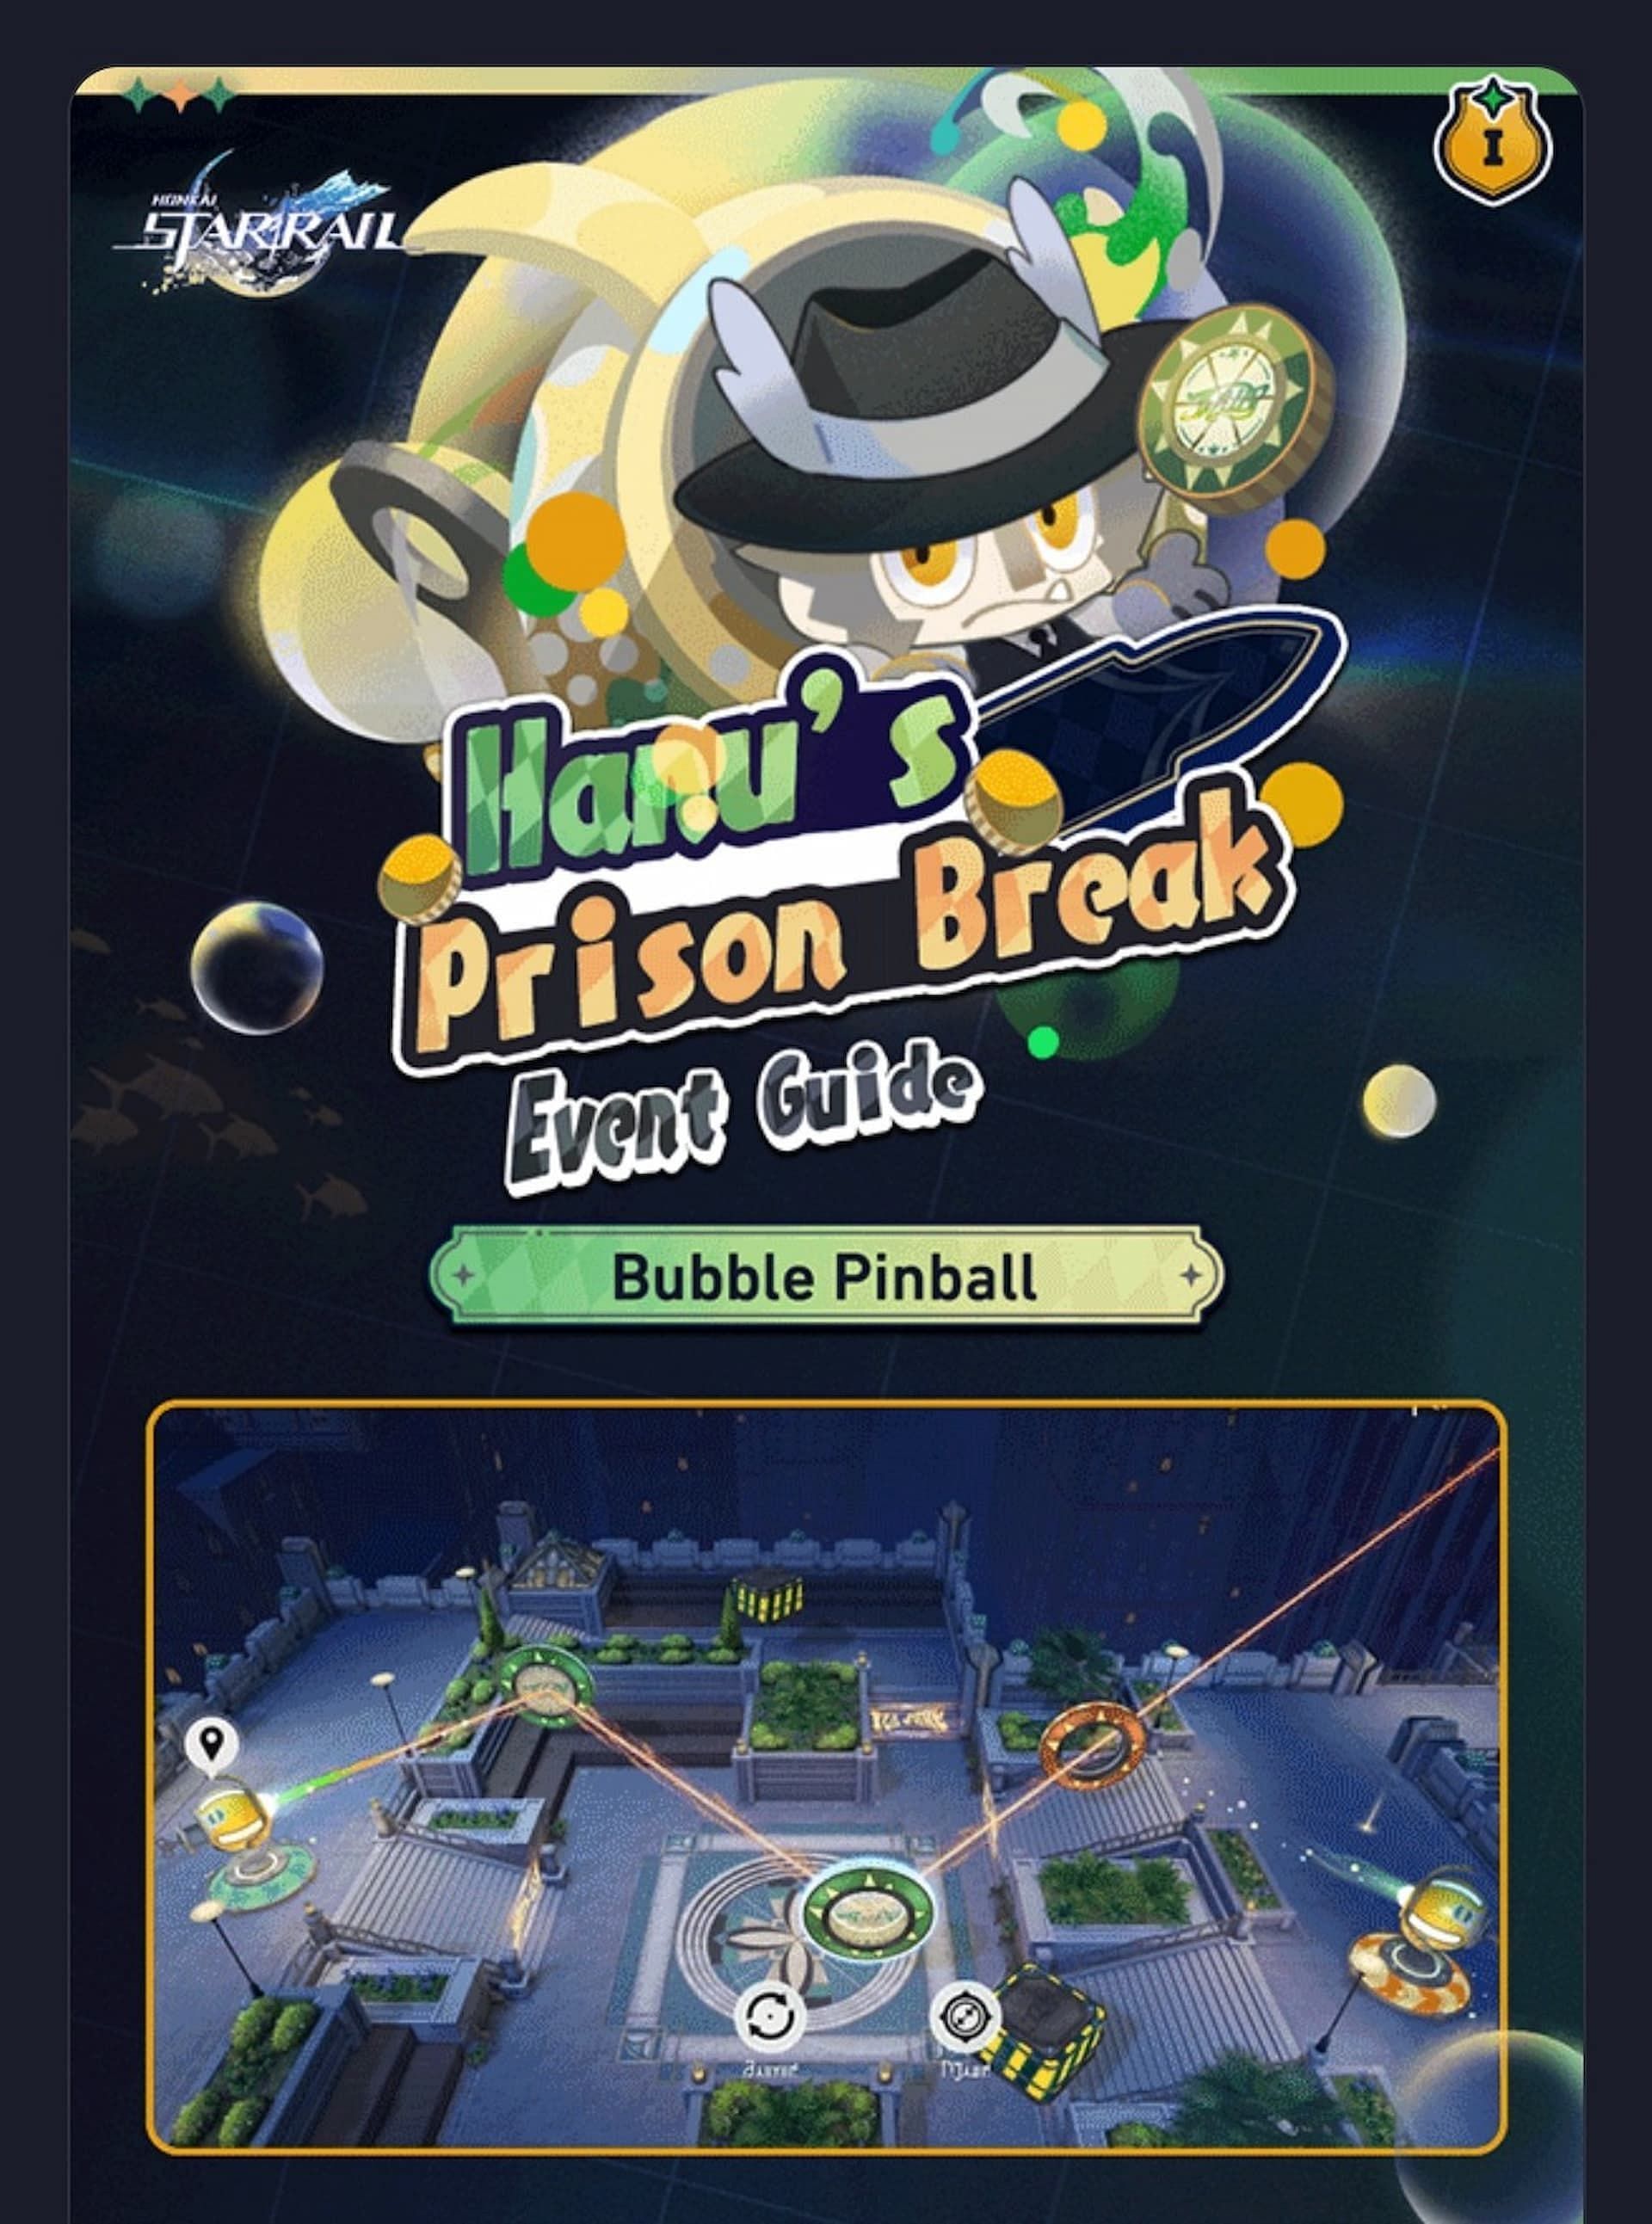 Bubble Pinball, a mode in this event of Honkai Star Rail (Image via HoYoverse)